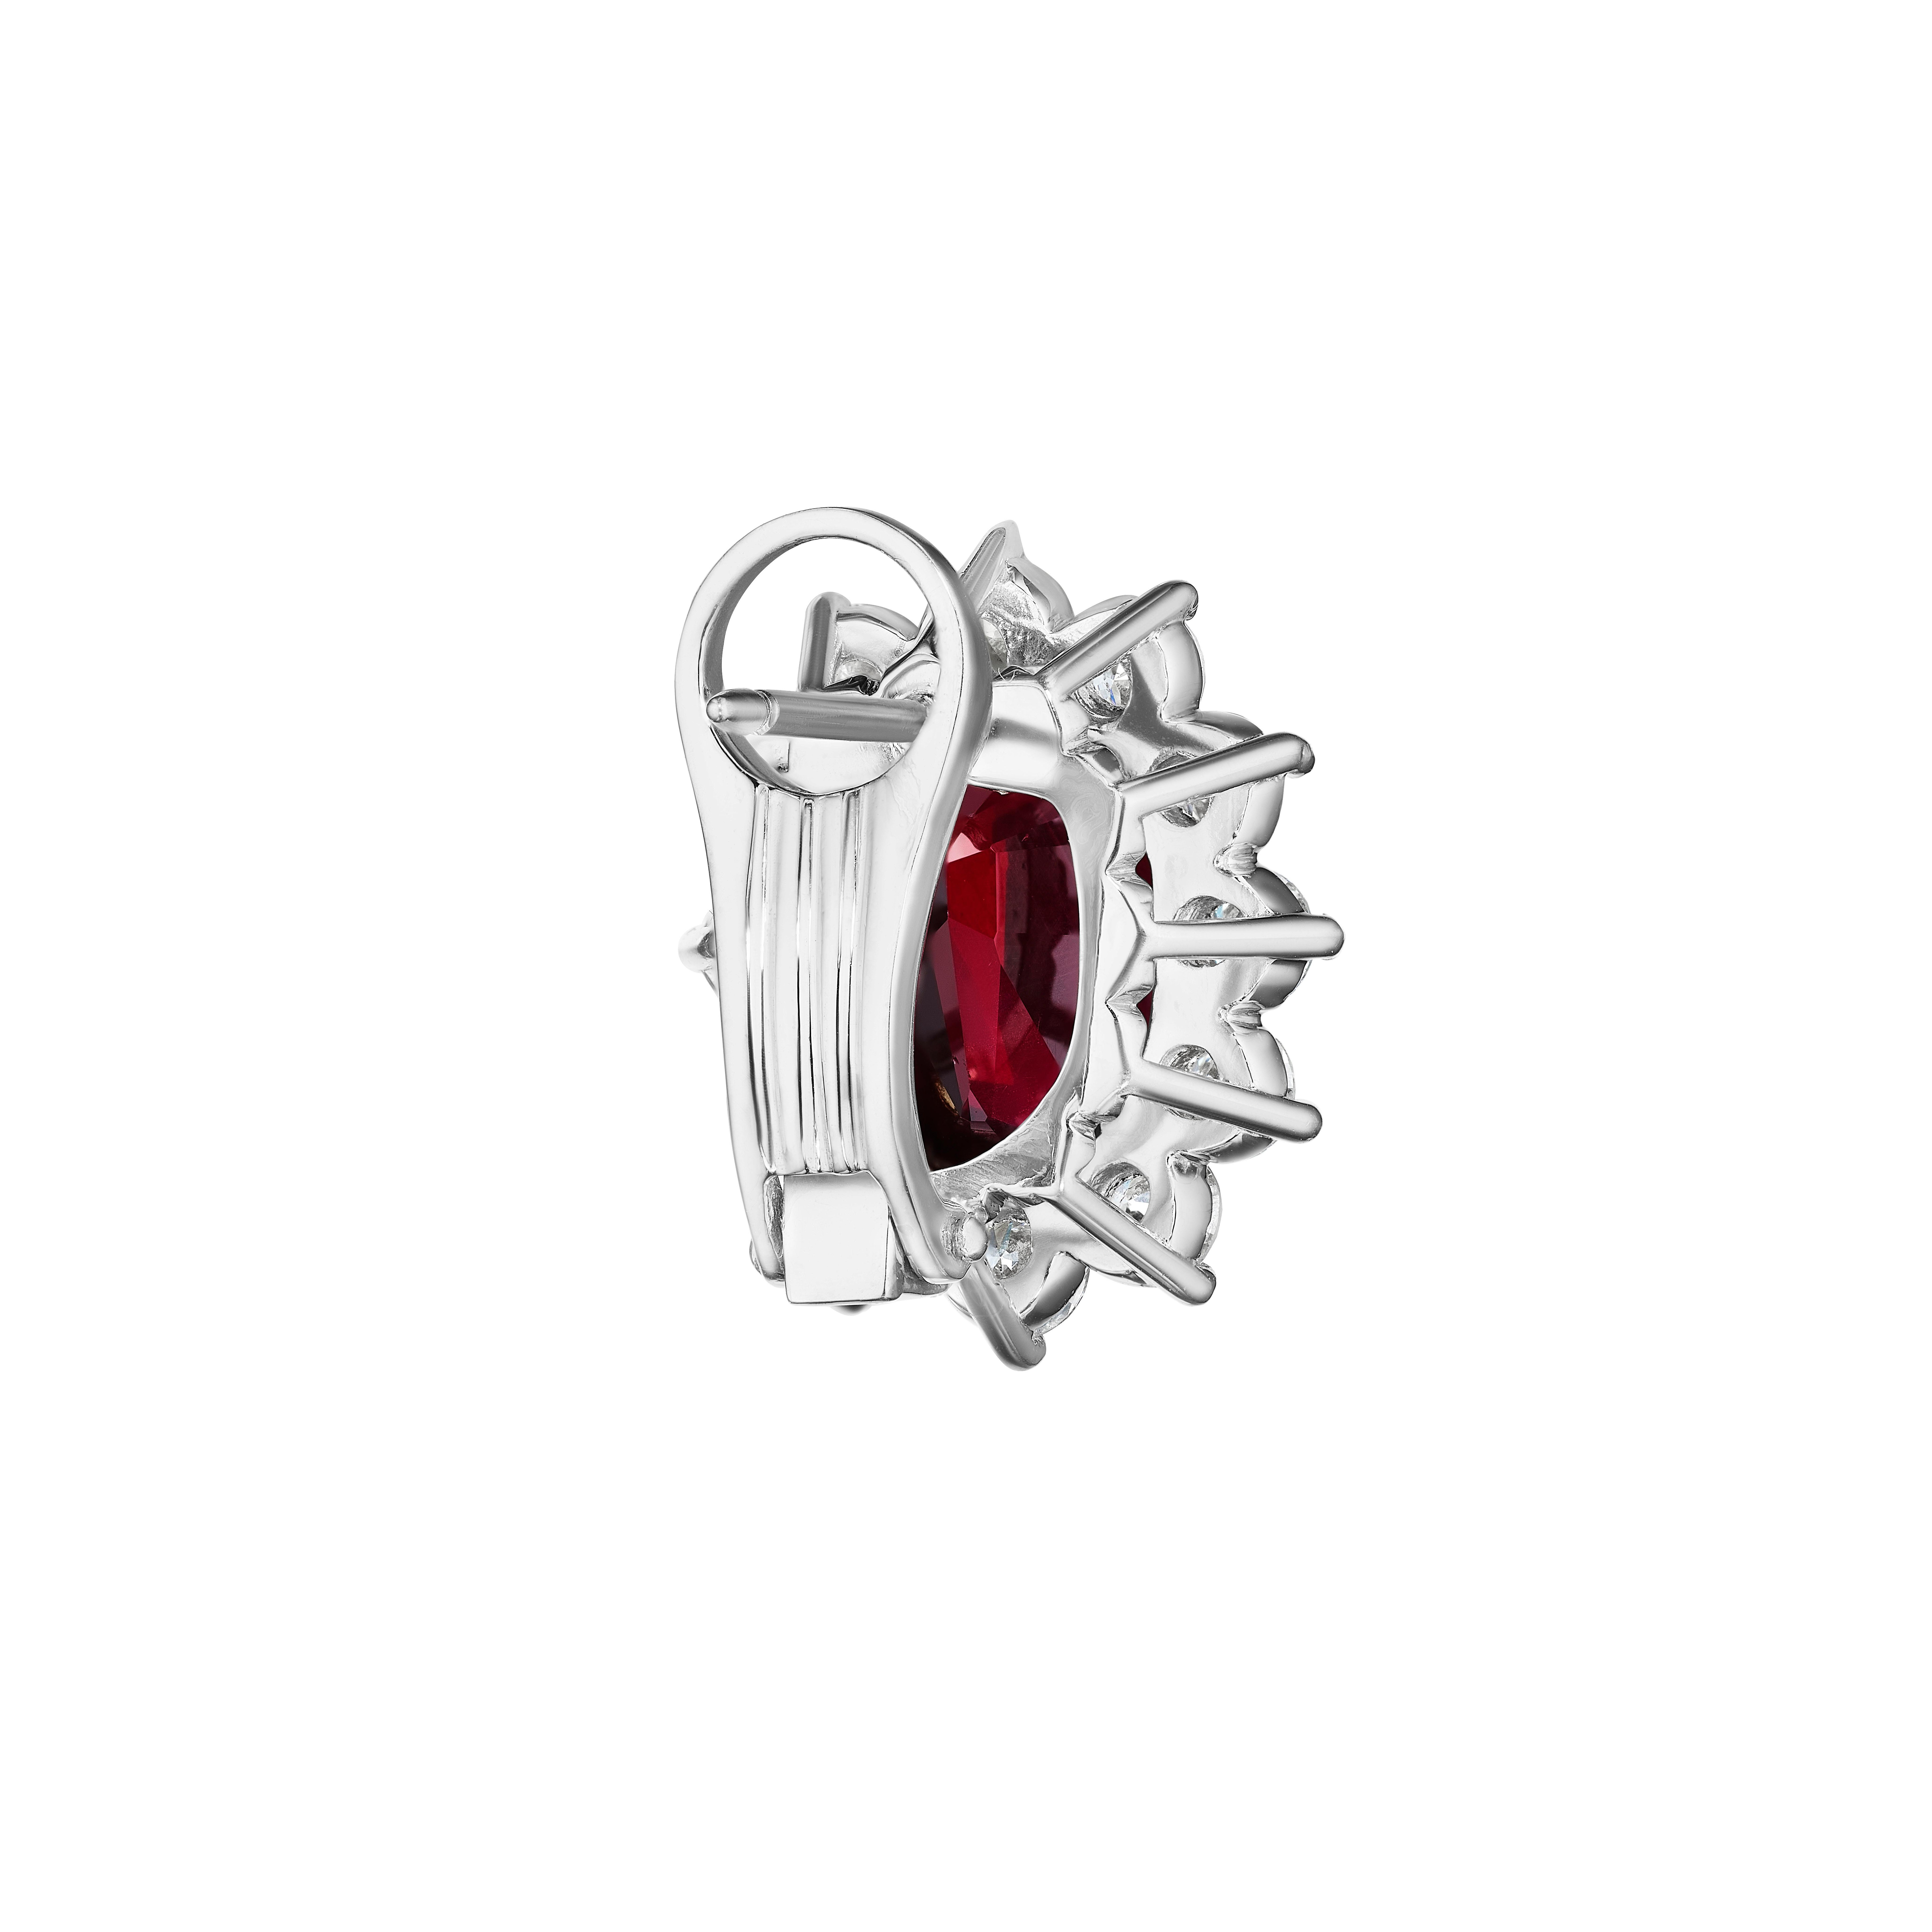 Modern 10.23ct Certified Natural Cushion Ruby & Diamond Halo Earrings in Platinum & 18K For Sale